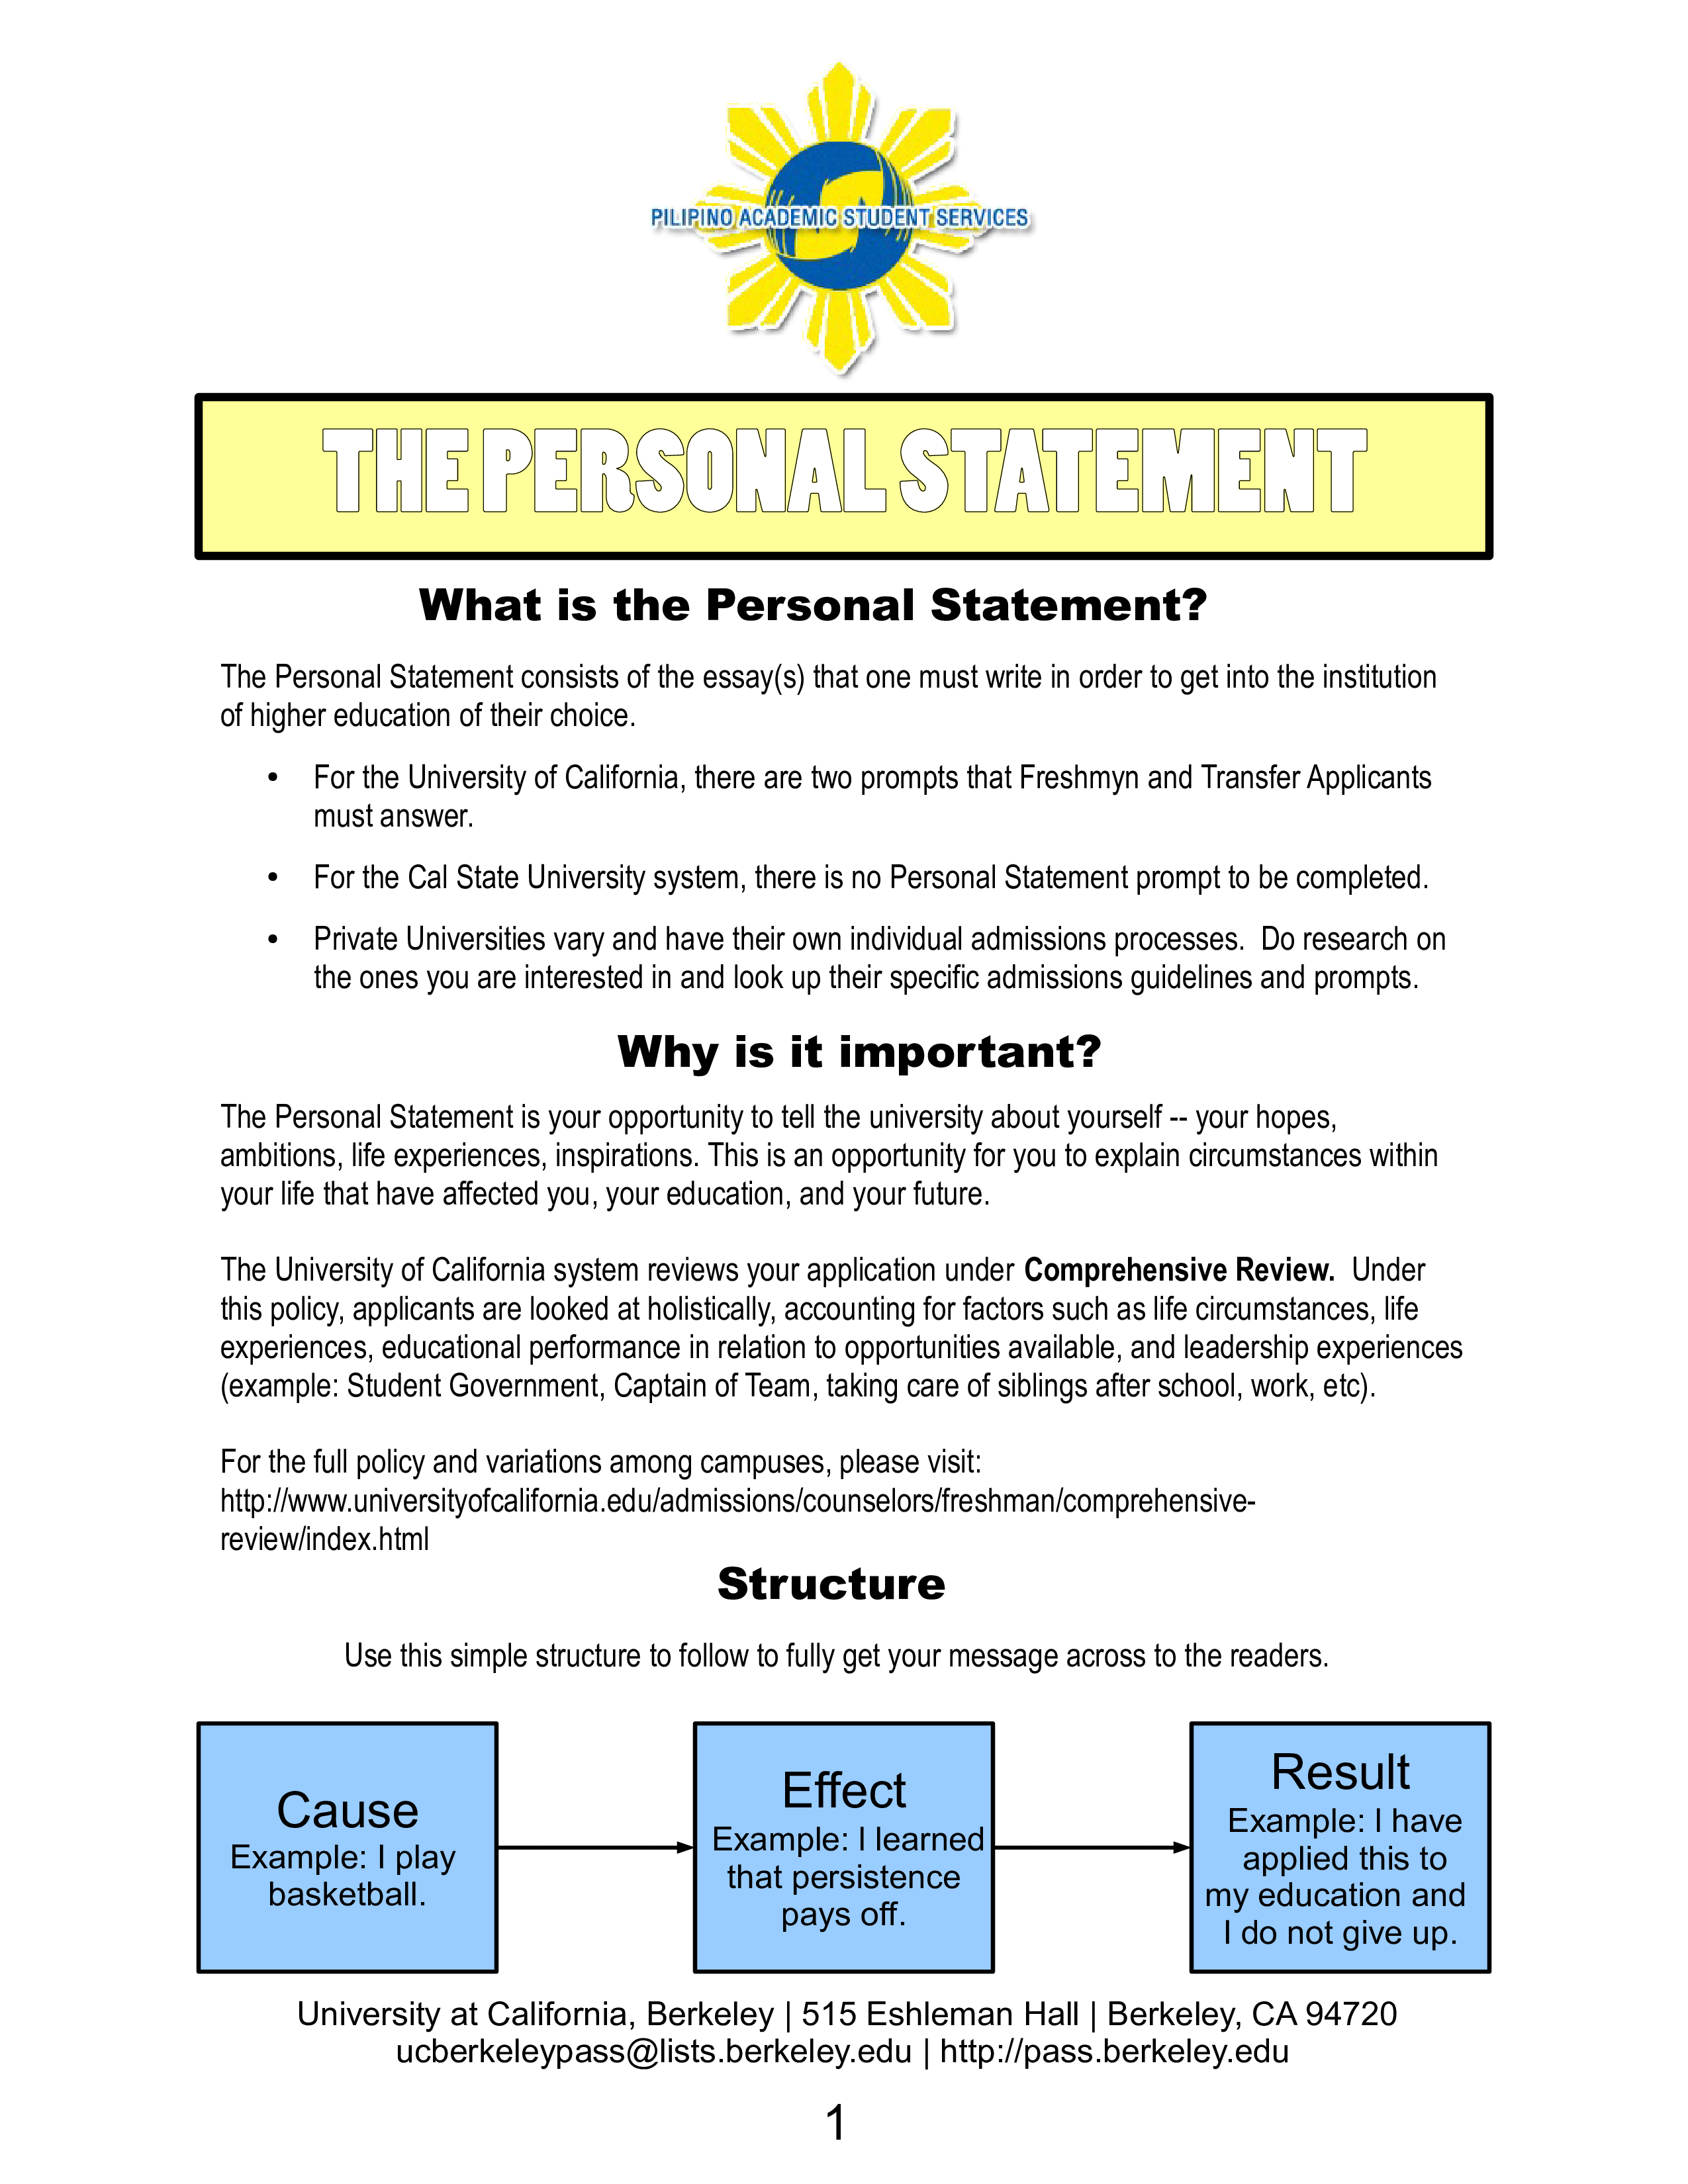 the structure of a personal statement